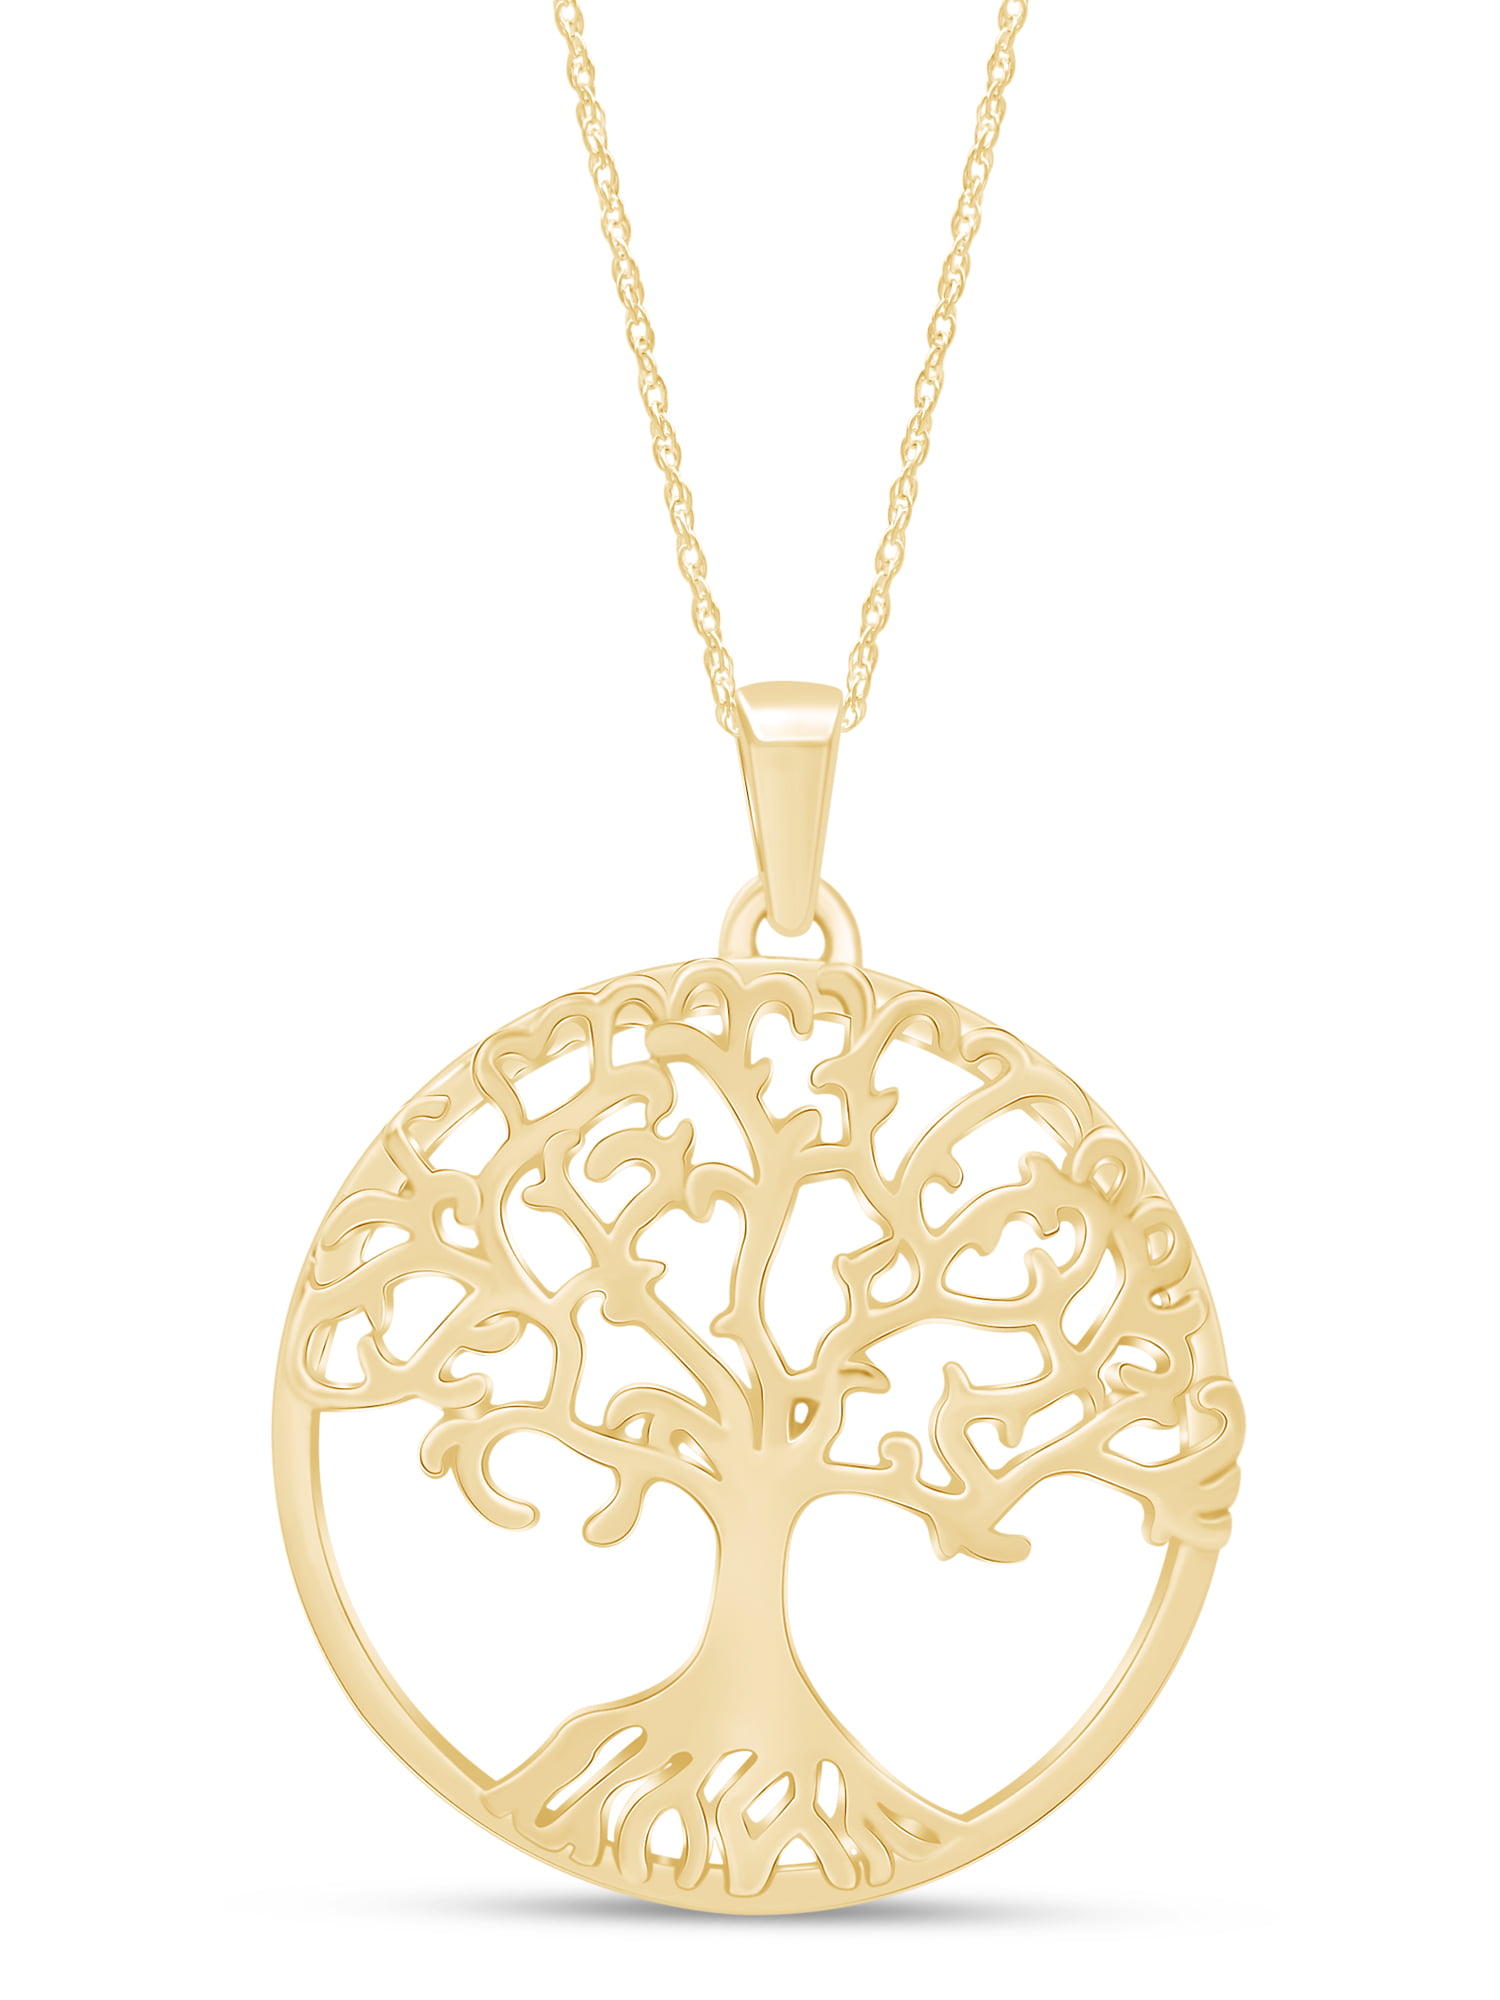 Wishrocks Graceful Flying Sparrow Pendant Necklace in 14K Gold Over Sterling Silver for Womens